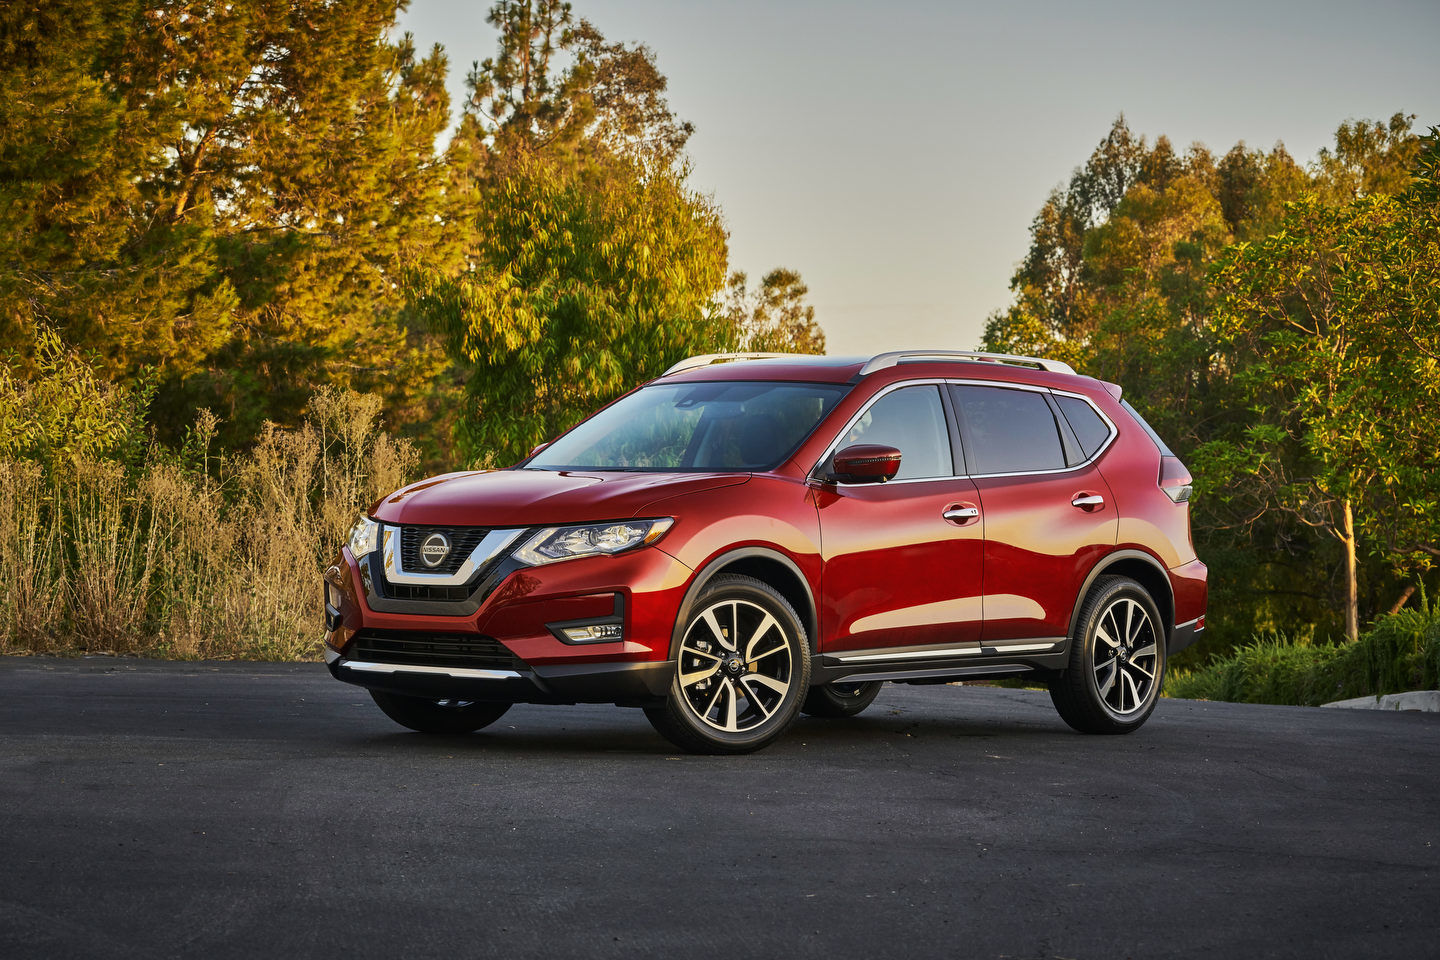 How a pre-owned Nissan Rogue stands out against a used Hyundai Tucson